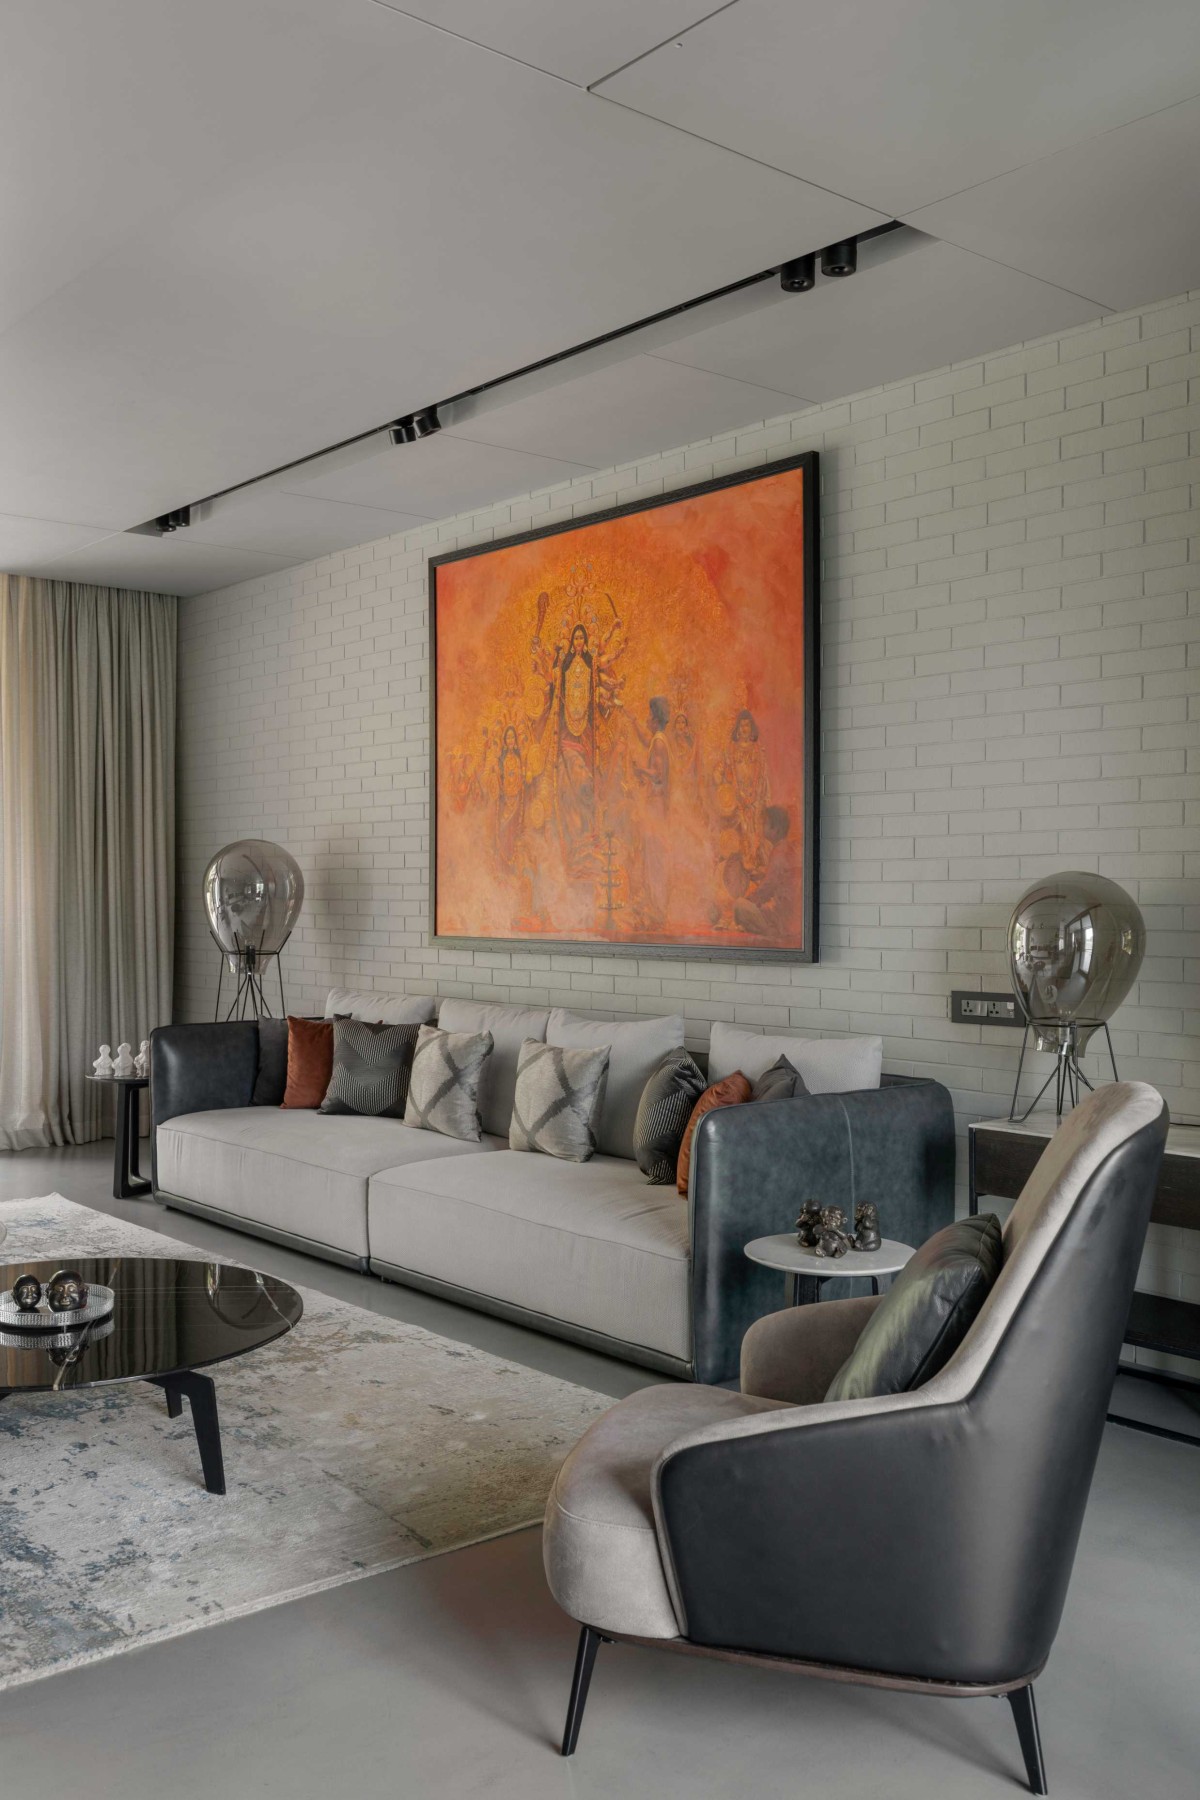 The formal living room of House Of Greys by ADND